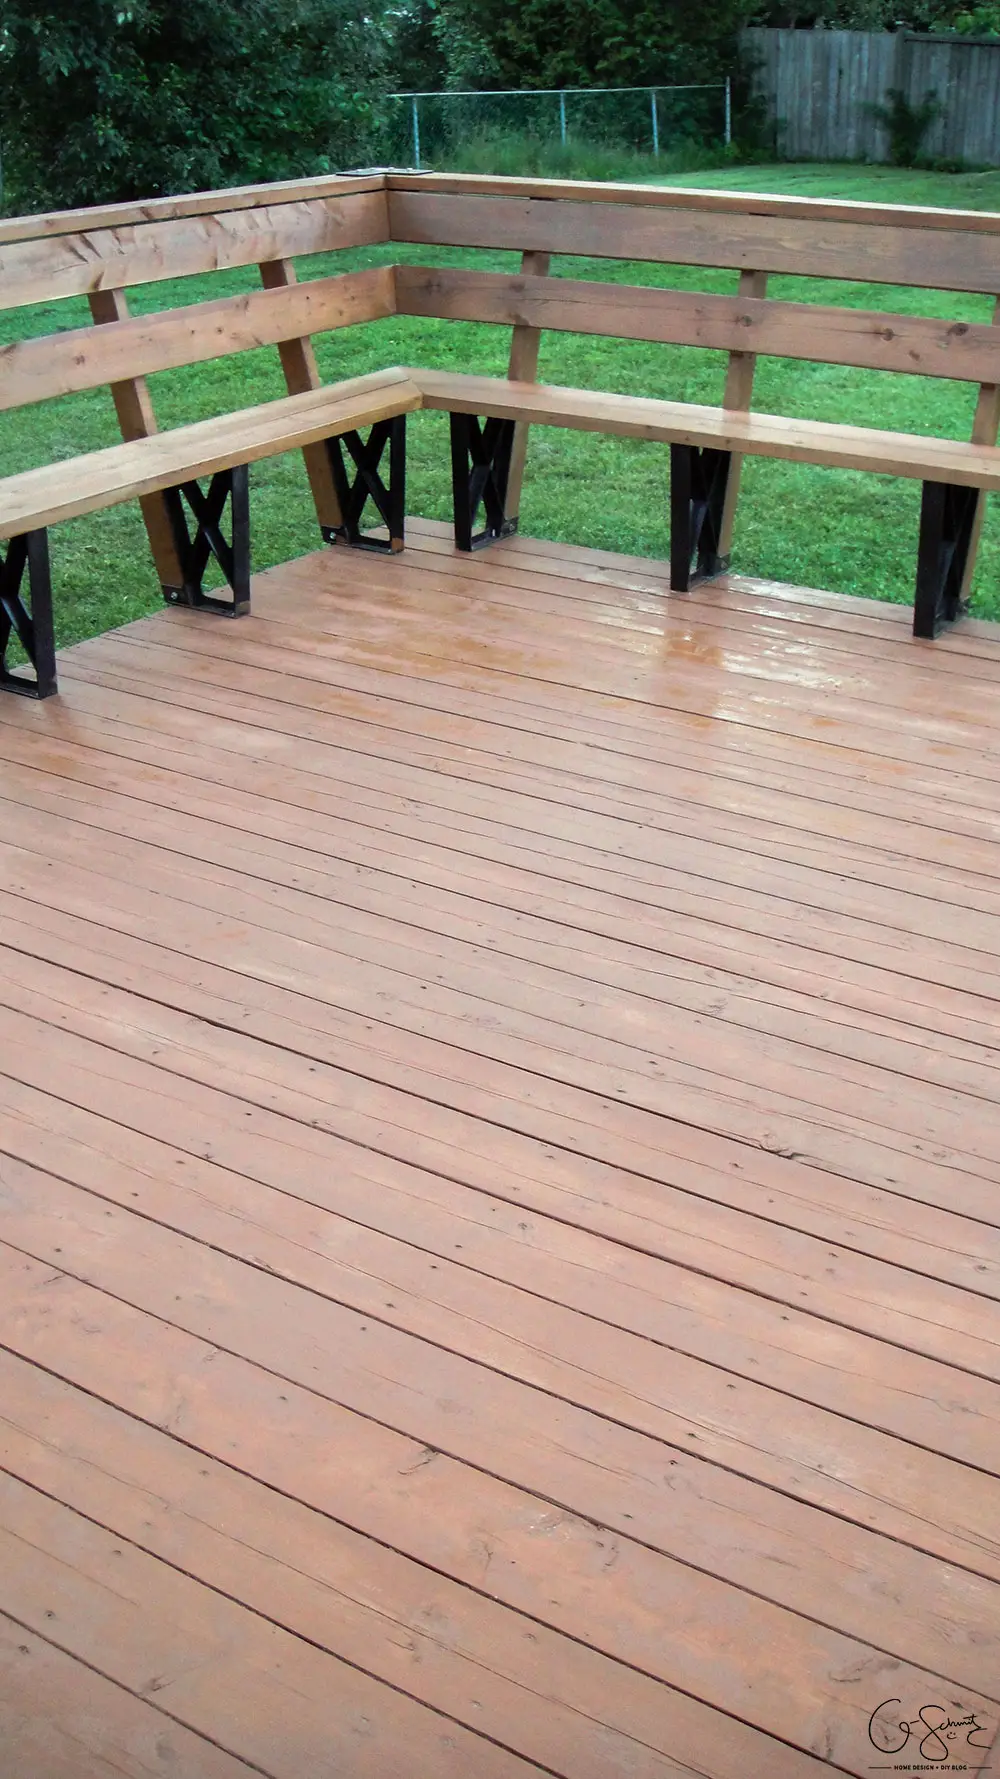 Staining the deck is an easy DIY project, but it is time consuming! Check out all the photos of the progress and read about the details on how to stain different angles. I can't wait to host some great backyard barbecue parties!